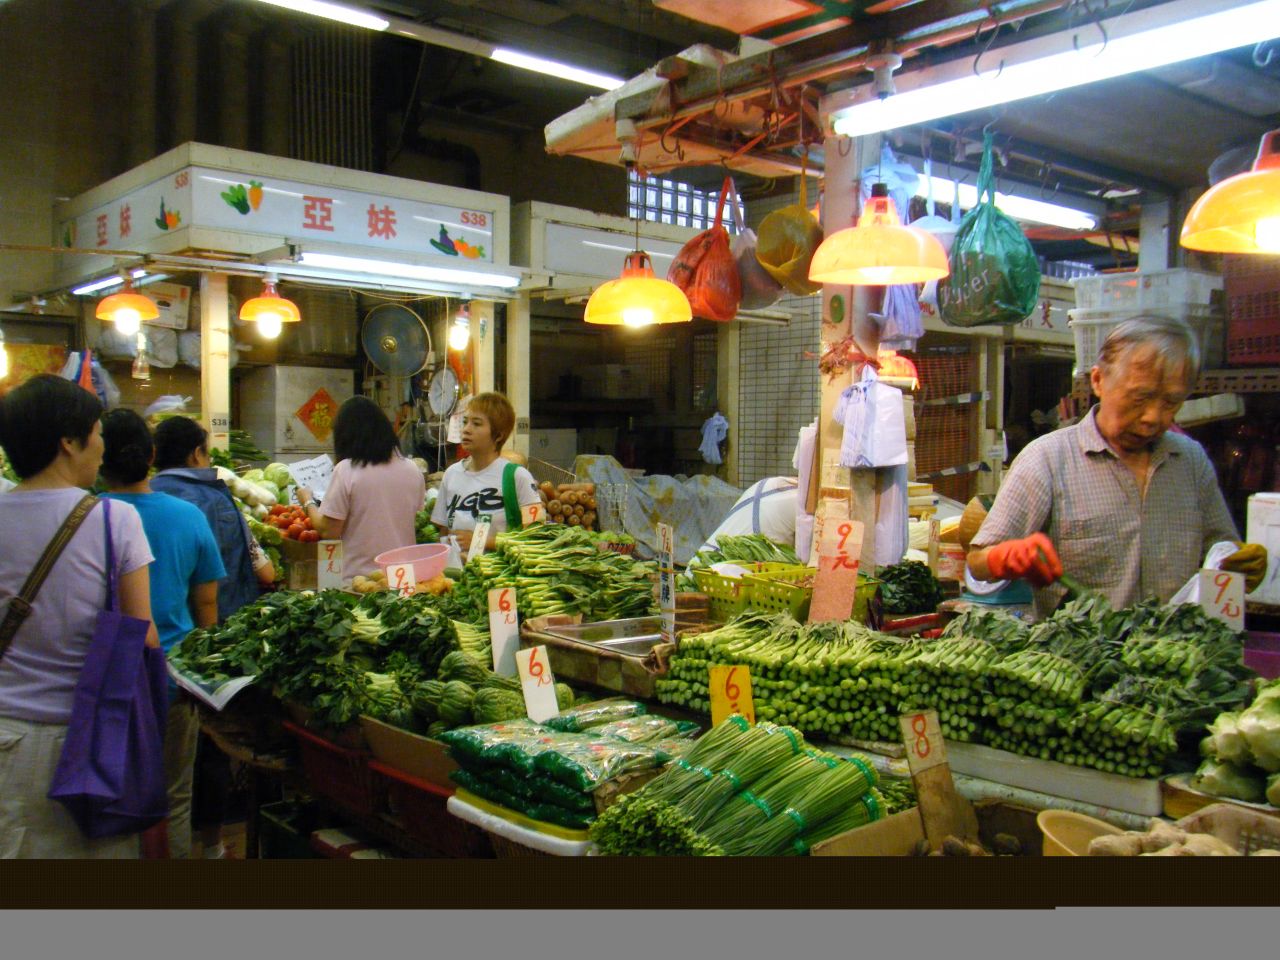 In Sai Ying Pun wet market stall holders compete for business, selling vegetables mostly imported from China. It's just a few blocks away from the central business district on Hong Kong Island.